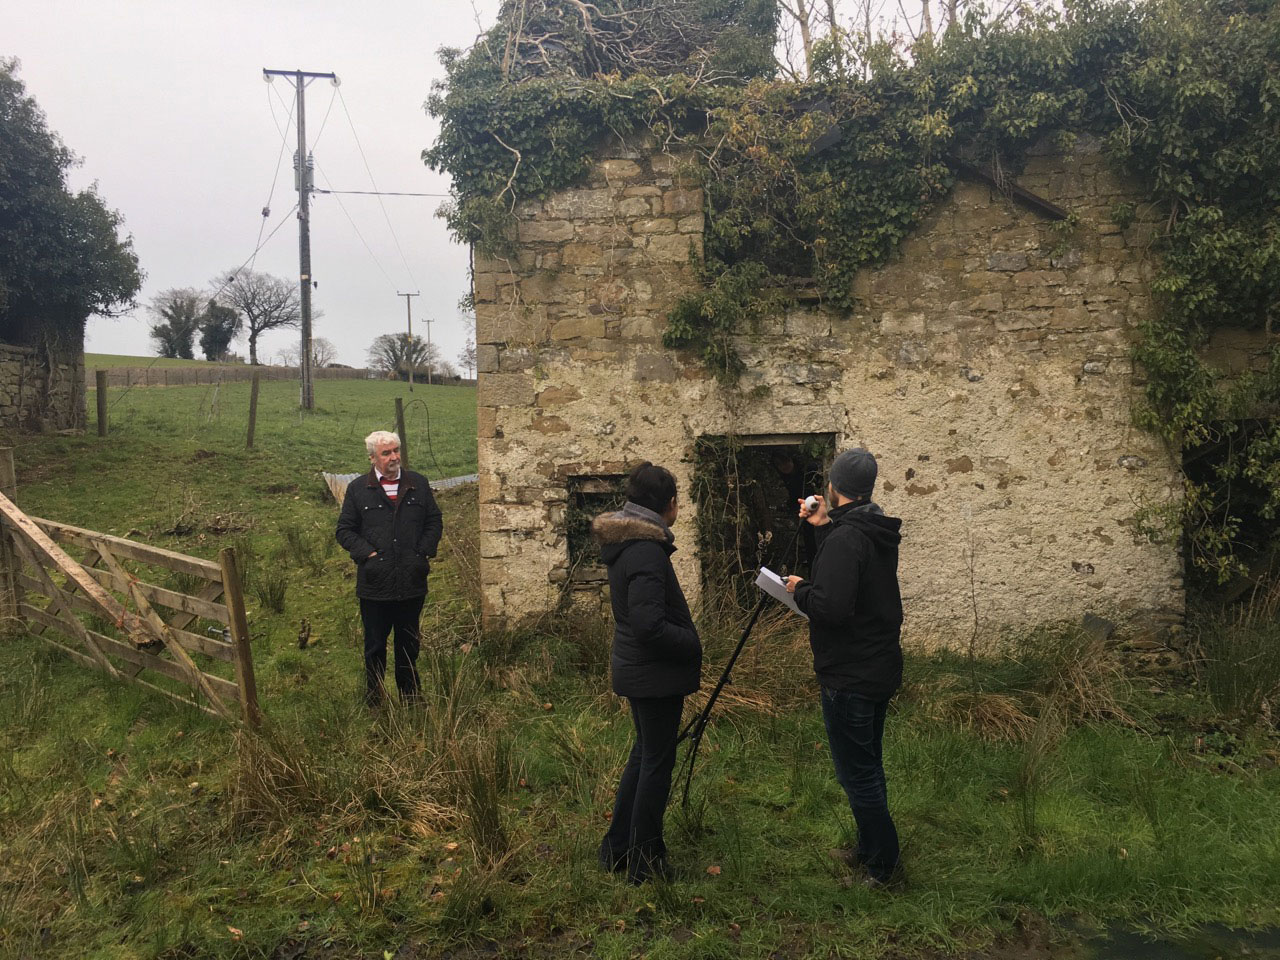 Rebecca Blandón and Stephen Groves prepare to interview Eric Brown of the South East Fermanagh Foundation